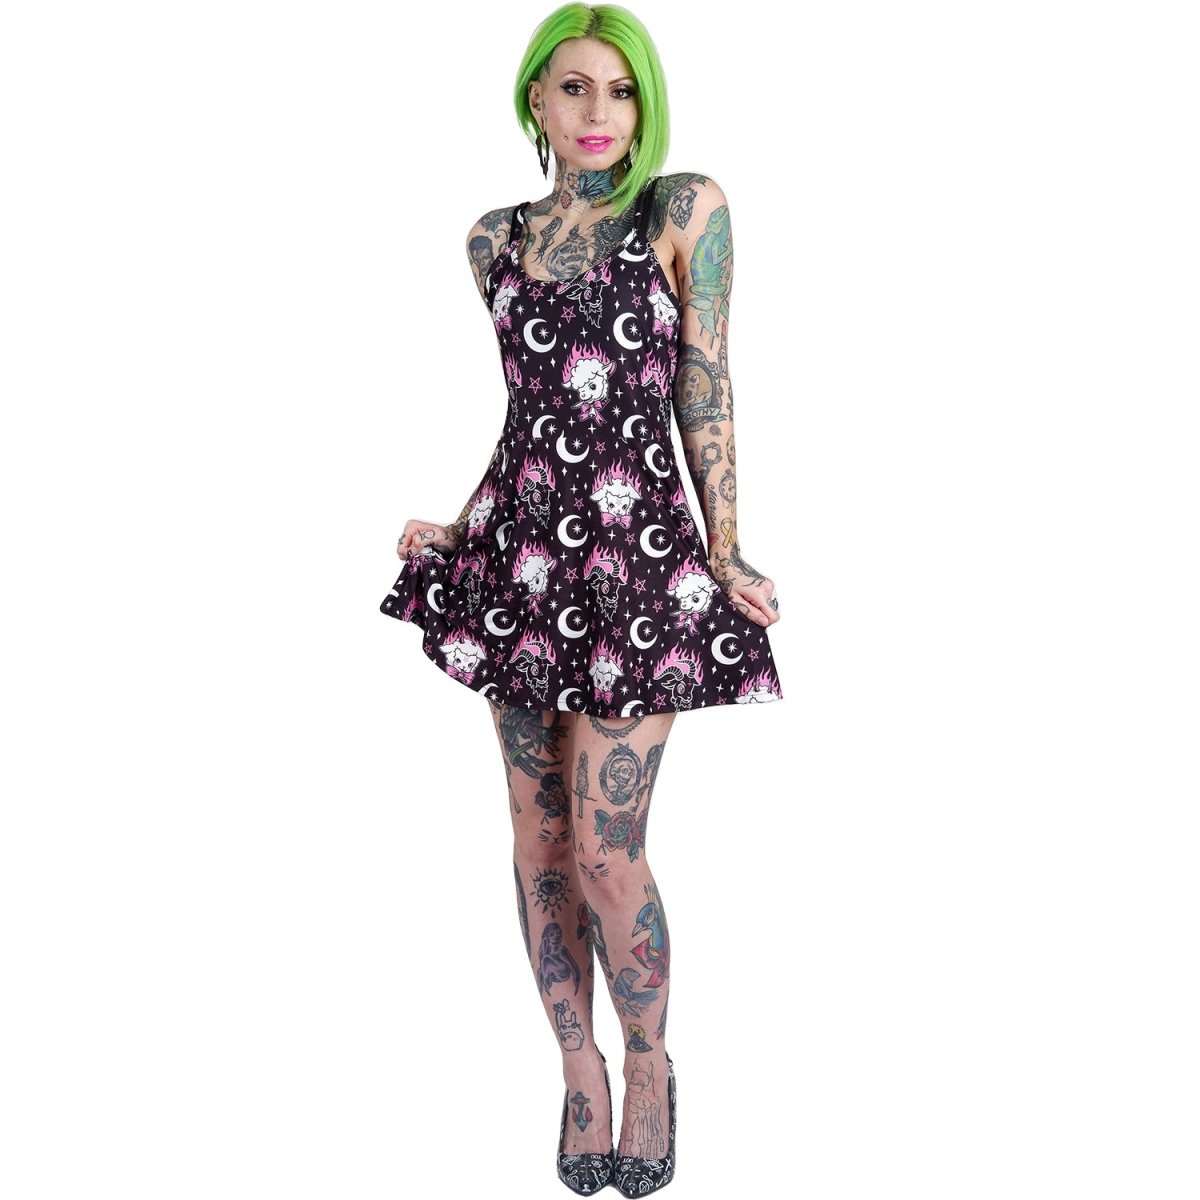 Too Fast | Cute Baby Demon Goats Skater Dress